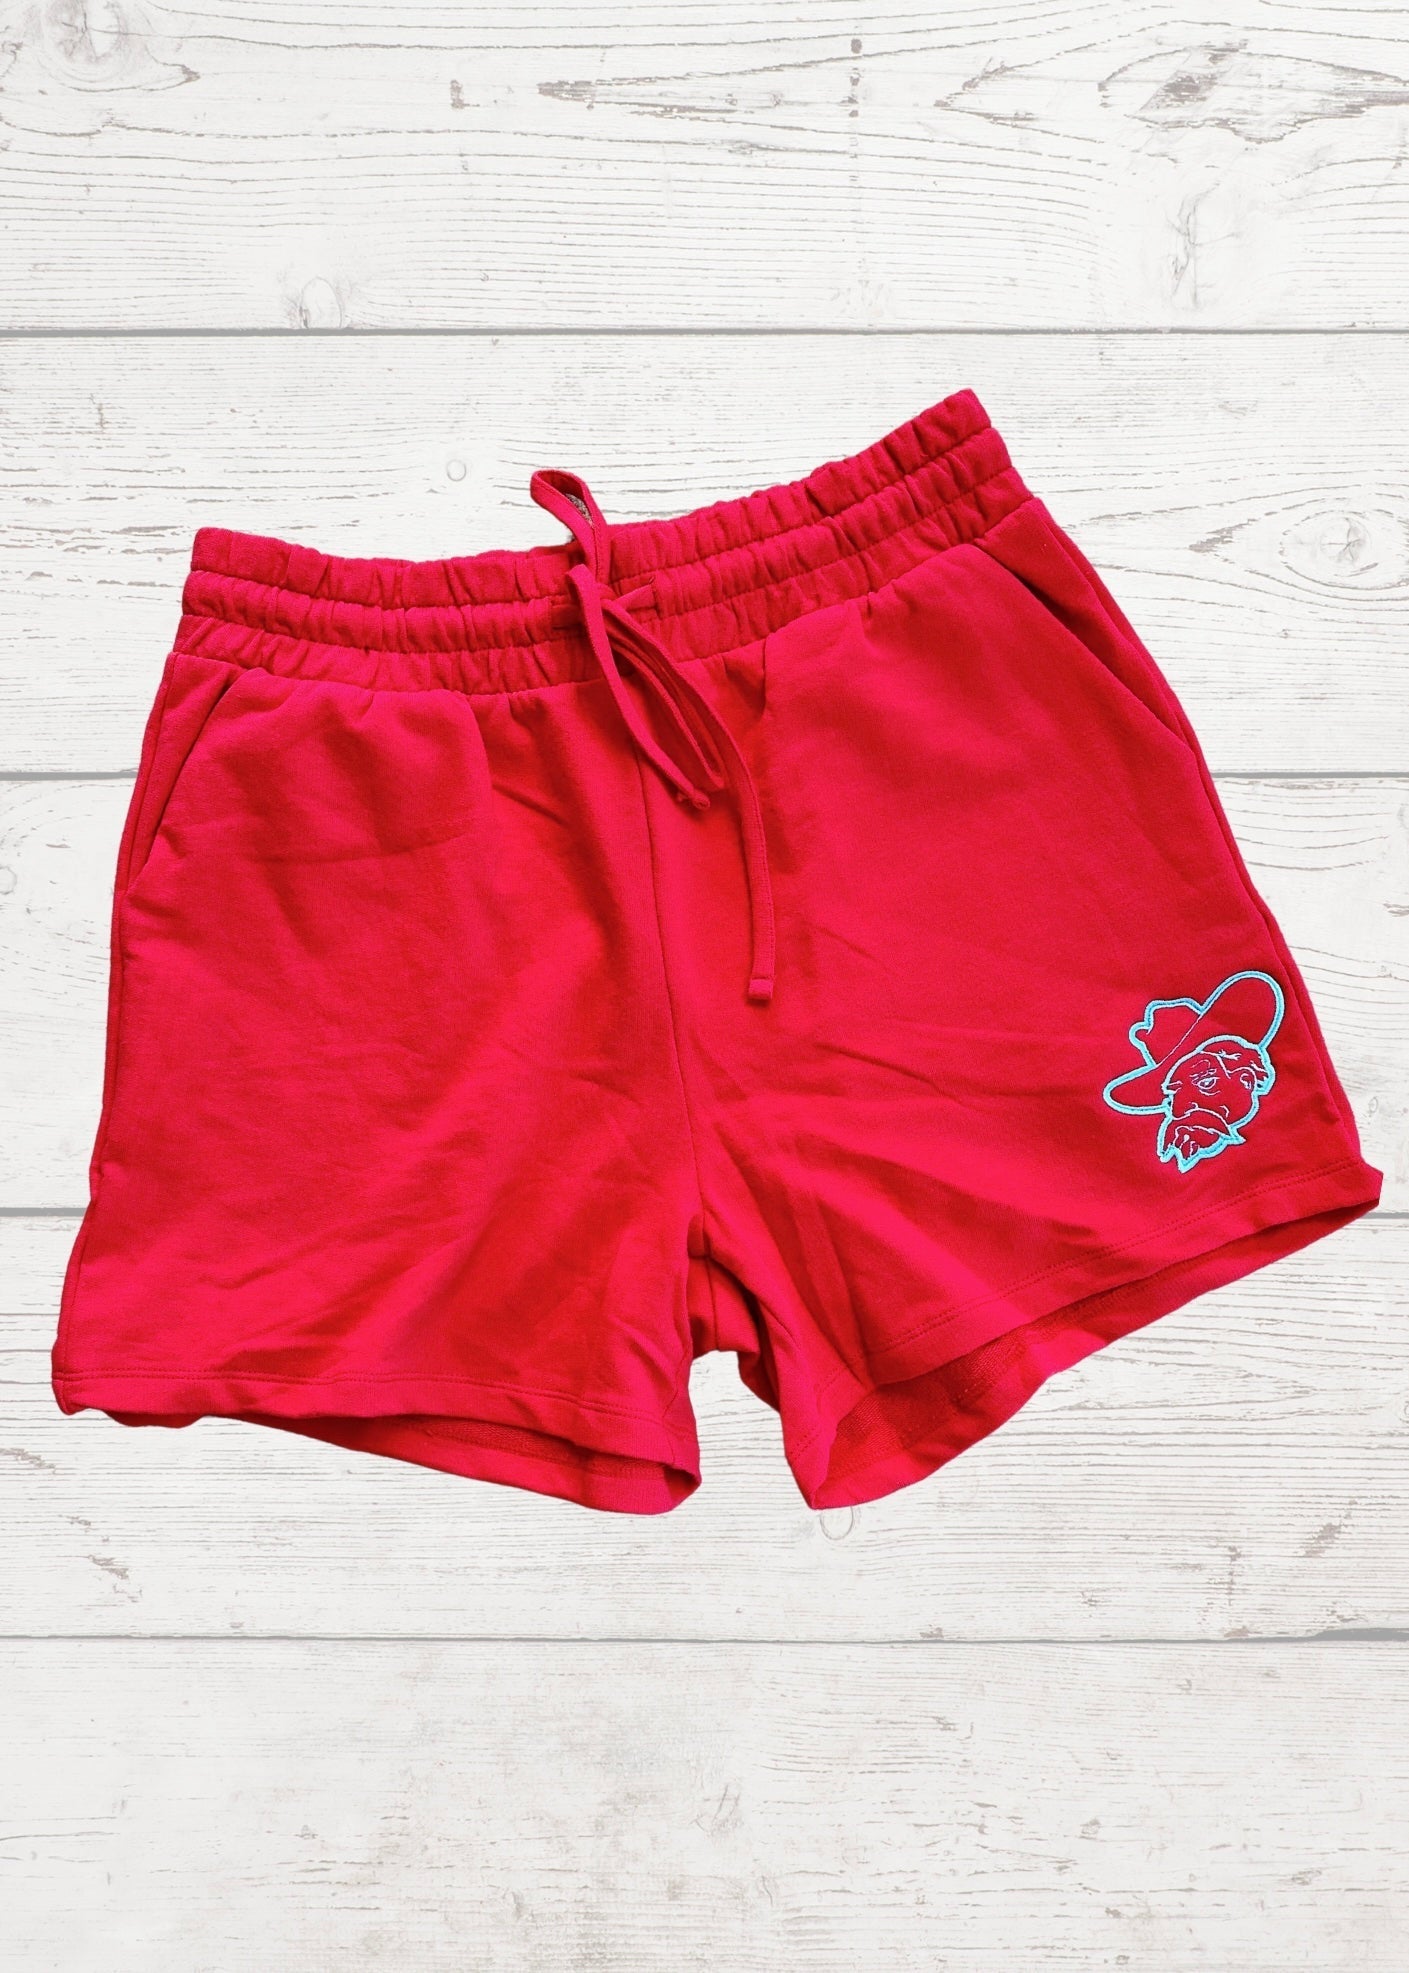 Rebel Embroidered Shorts - -Jimberly's Boutique-Olive Branch-Mississippi